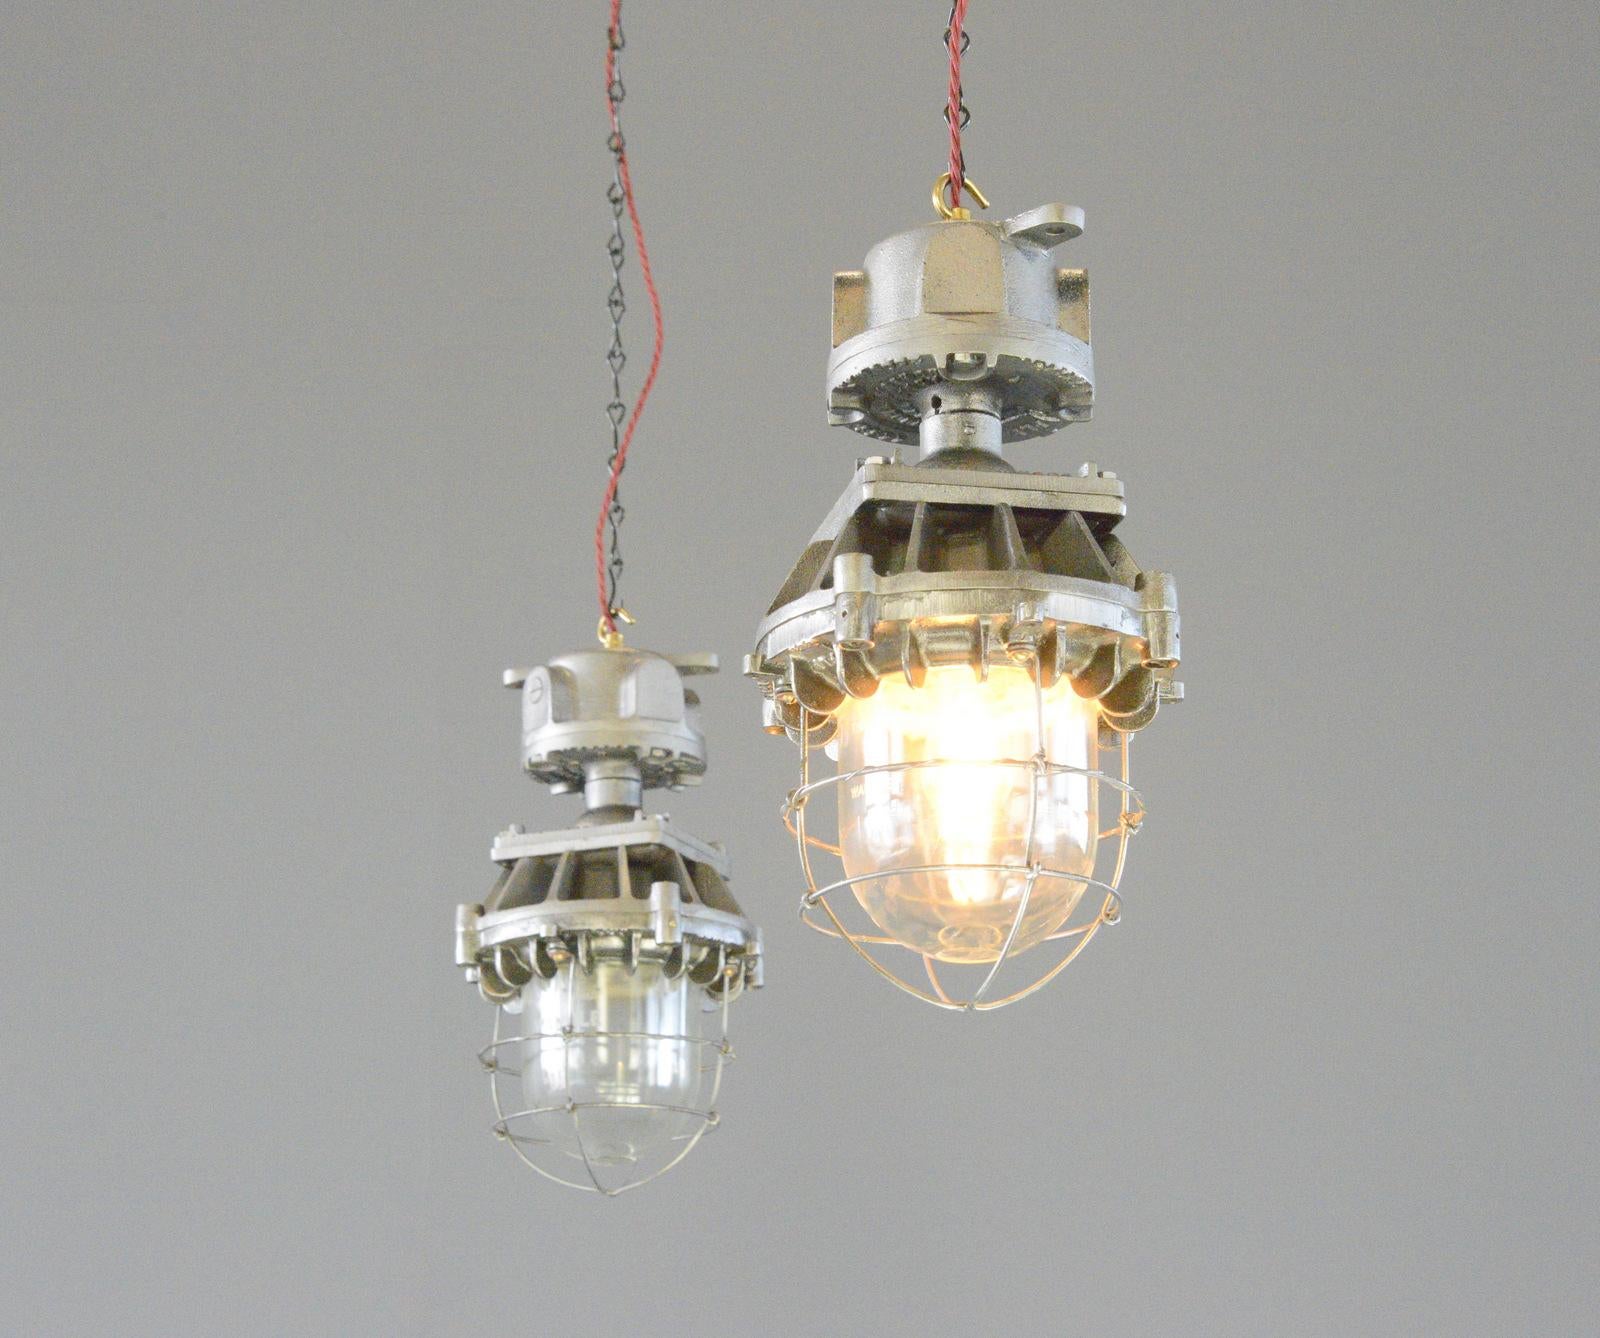 English Explosion Proof Pendant Lights by Wardle, circa 1930s For Sale